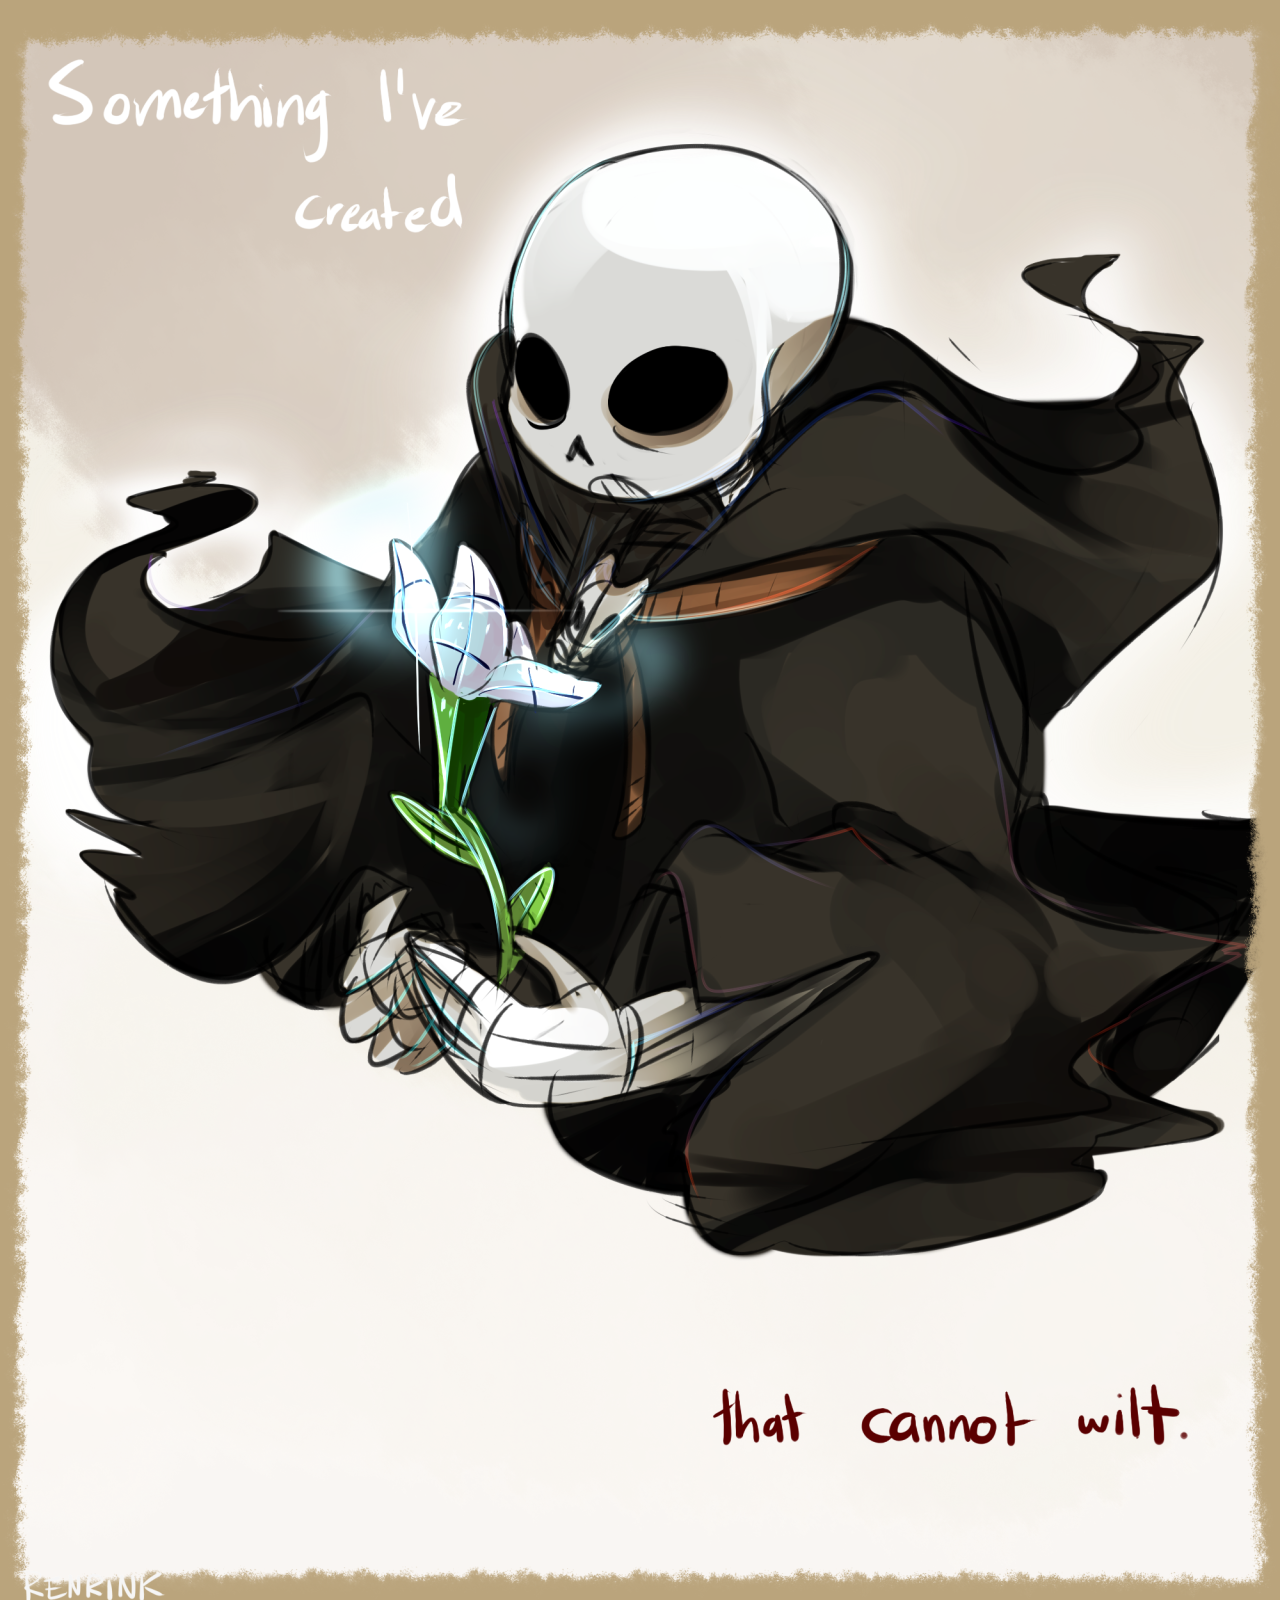 Reaper Sans wallpaper by DragonGirlRed - Download on ZEDGE™